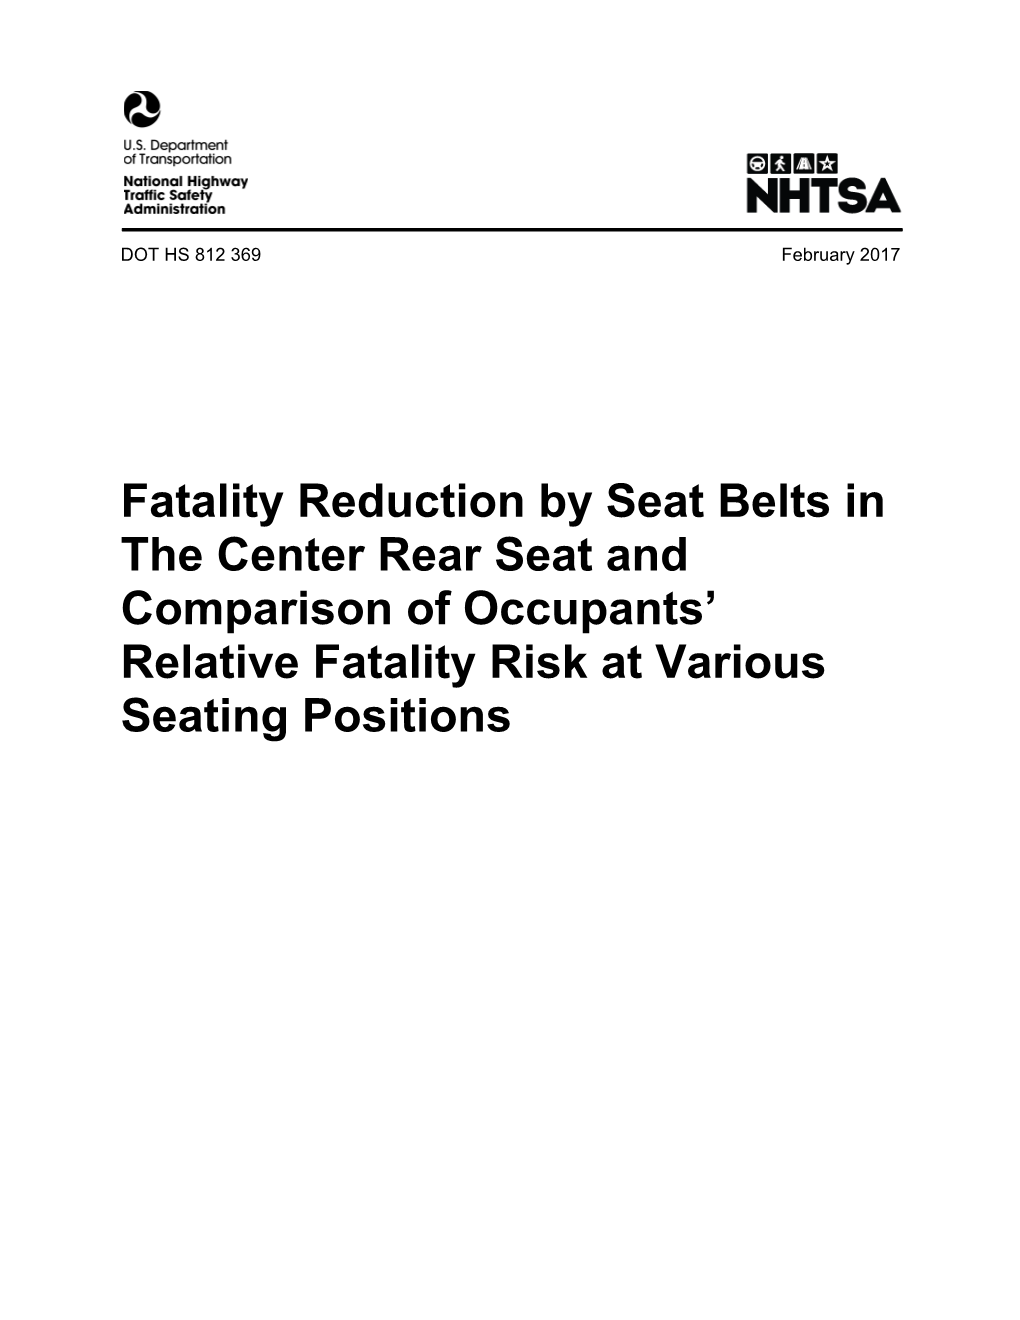 Fatality Reduction by Seat Belts in the Center Rear Seat and Comparison of Occupants’ Relative Fatality Risk at Various Seating Positions